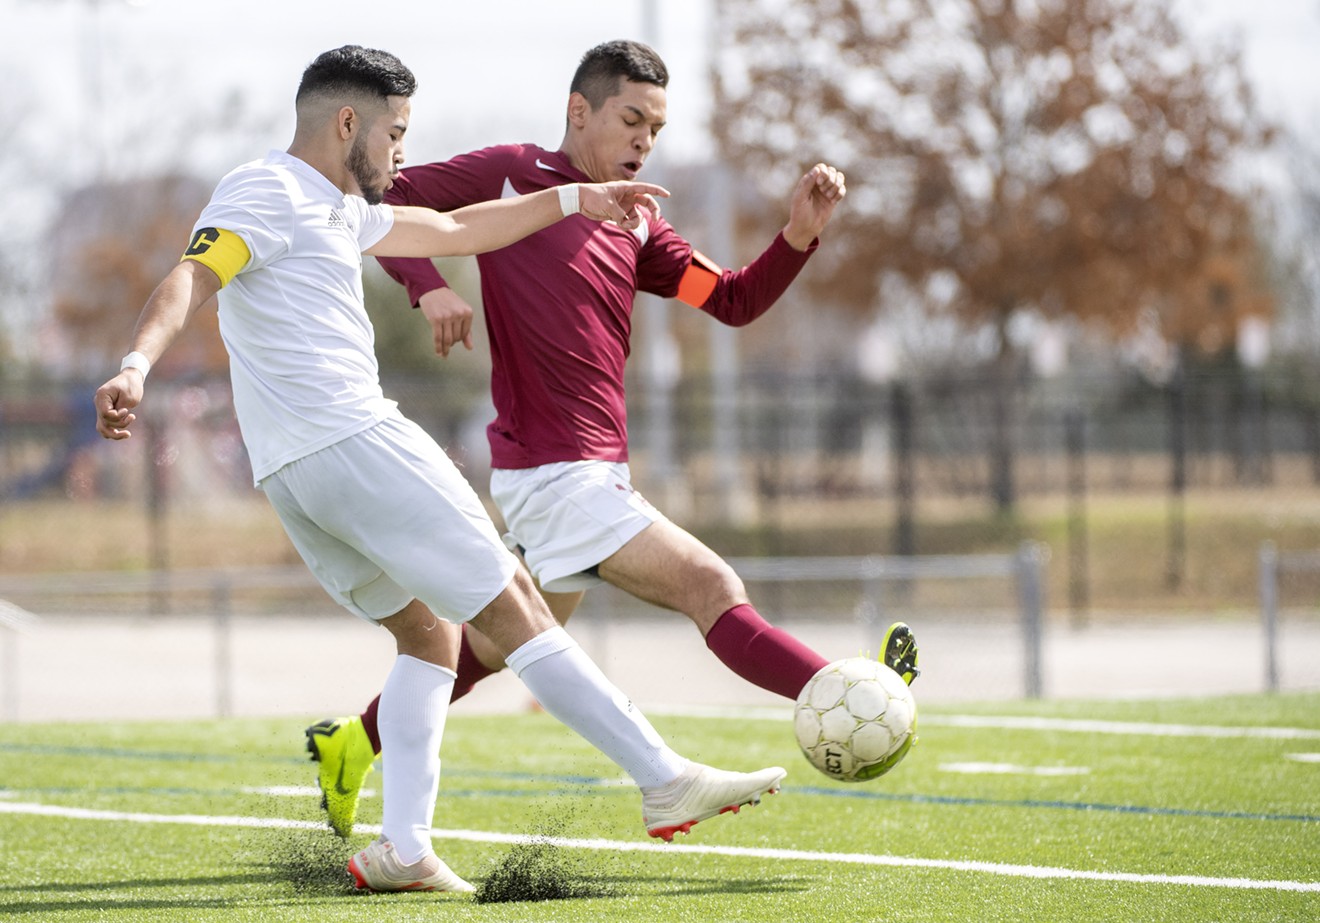 Thomas Jefferson junior defender Eduardo Flores competes for the ball against a Woodrow Wilson player, in February 2019 in Addison.